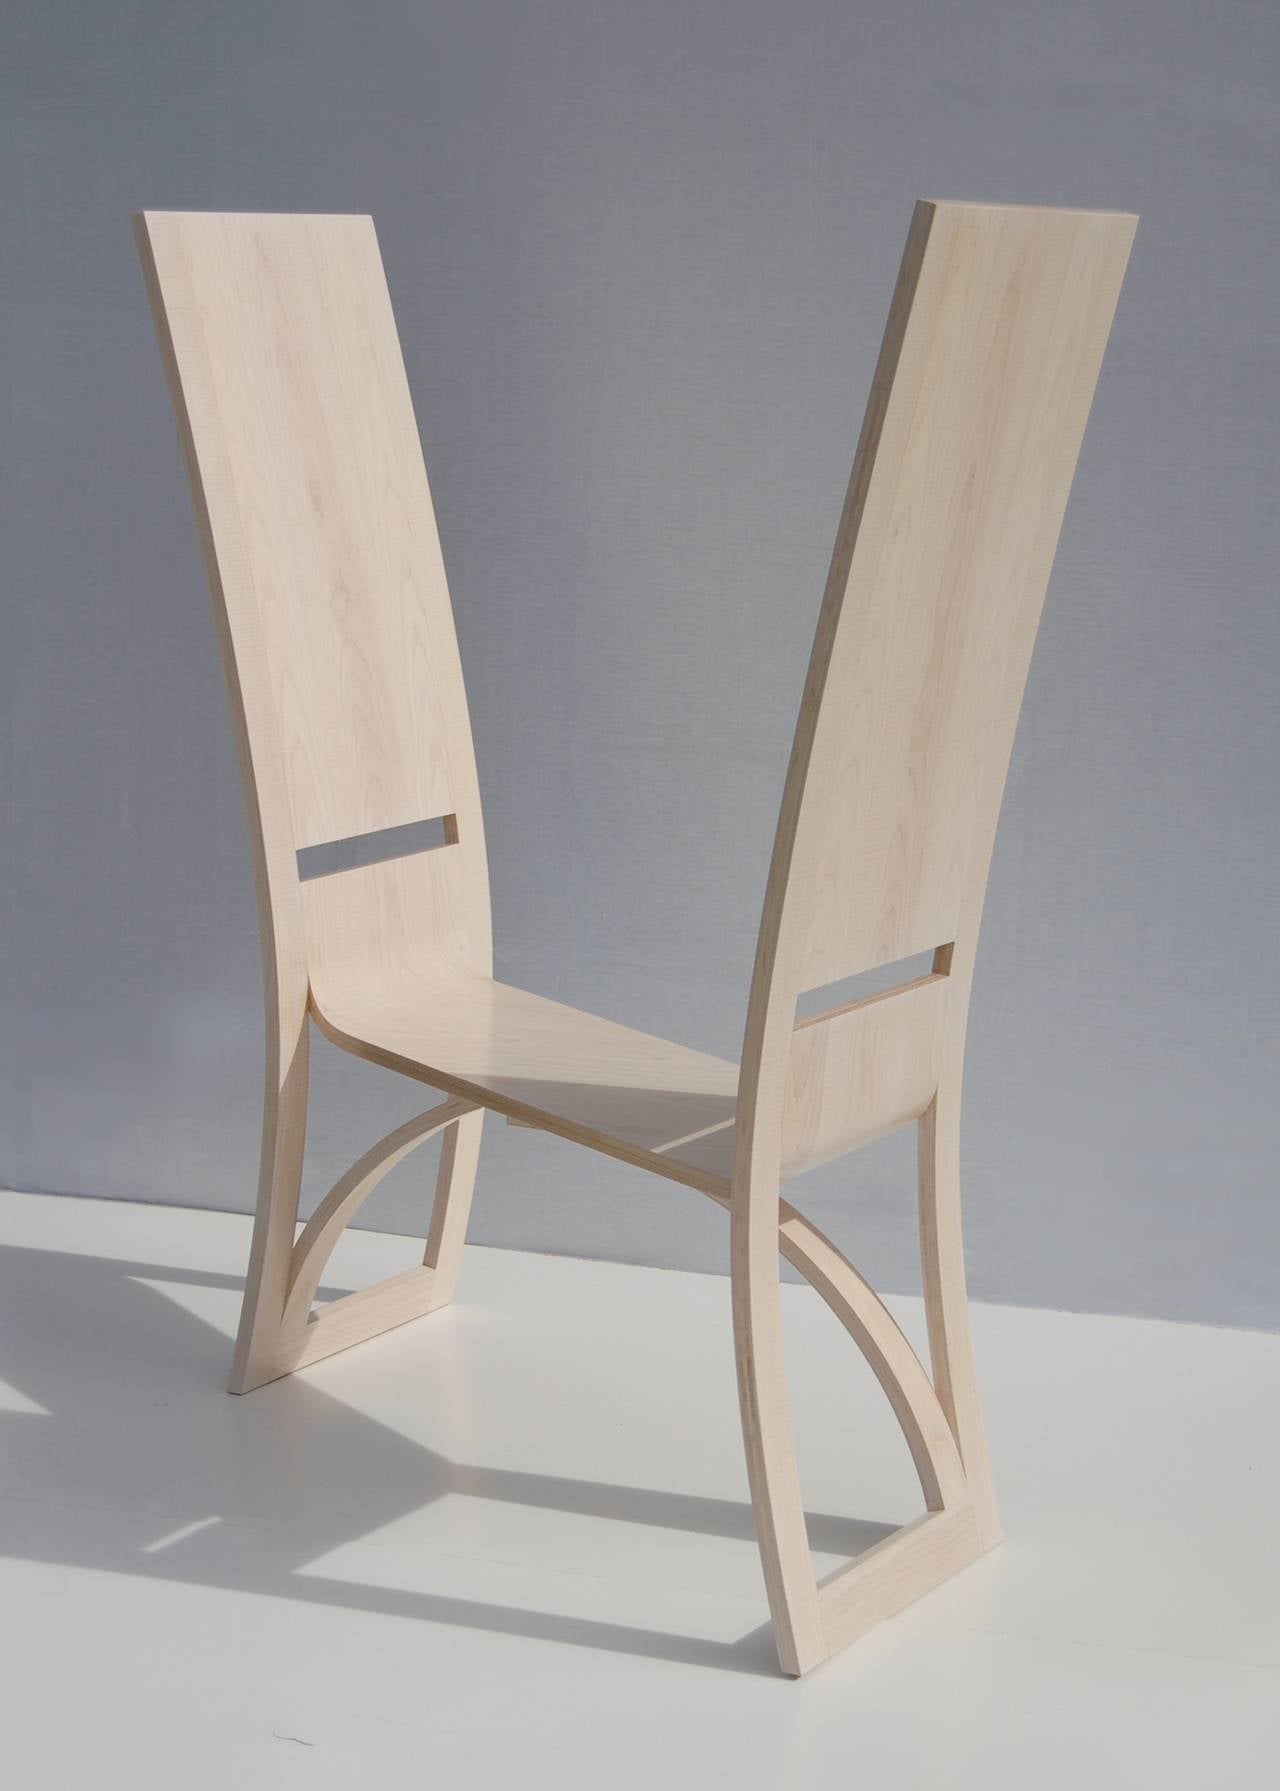 A collectible from award-winning designer Katie Walker. An elegant and deceptively simple form.
 
This piece plays on the dialogue between two separate chairs. Accordingly, if two people were seated one would have their legs to one side, the